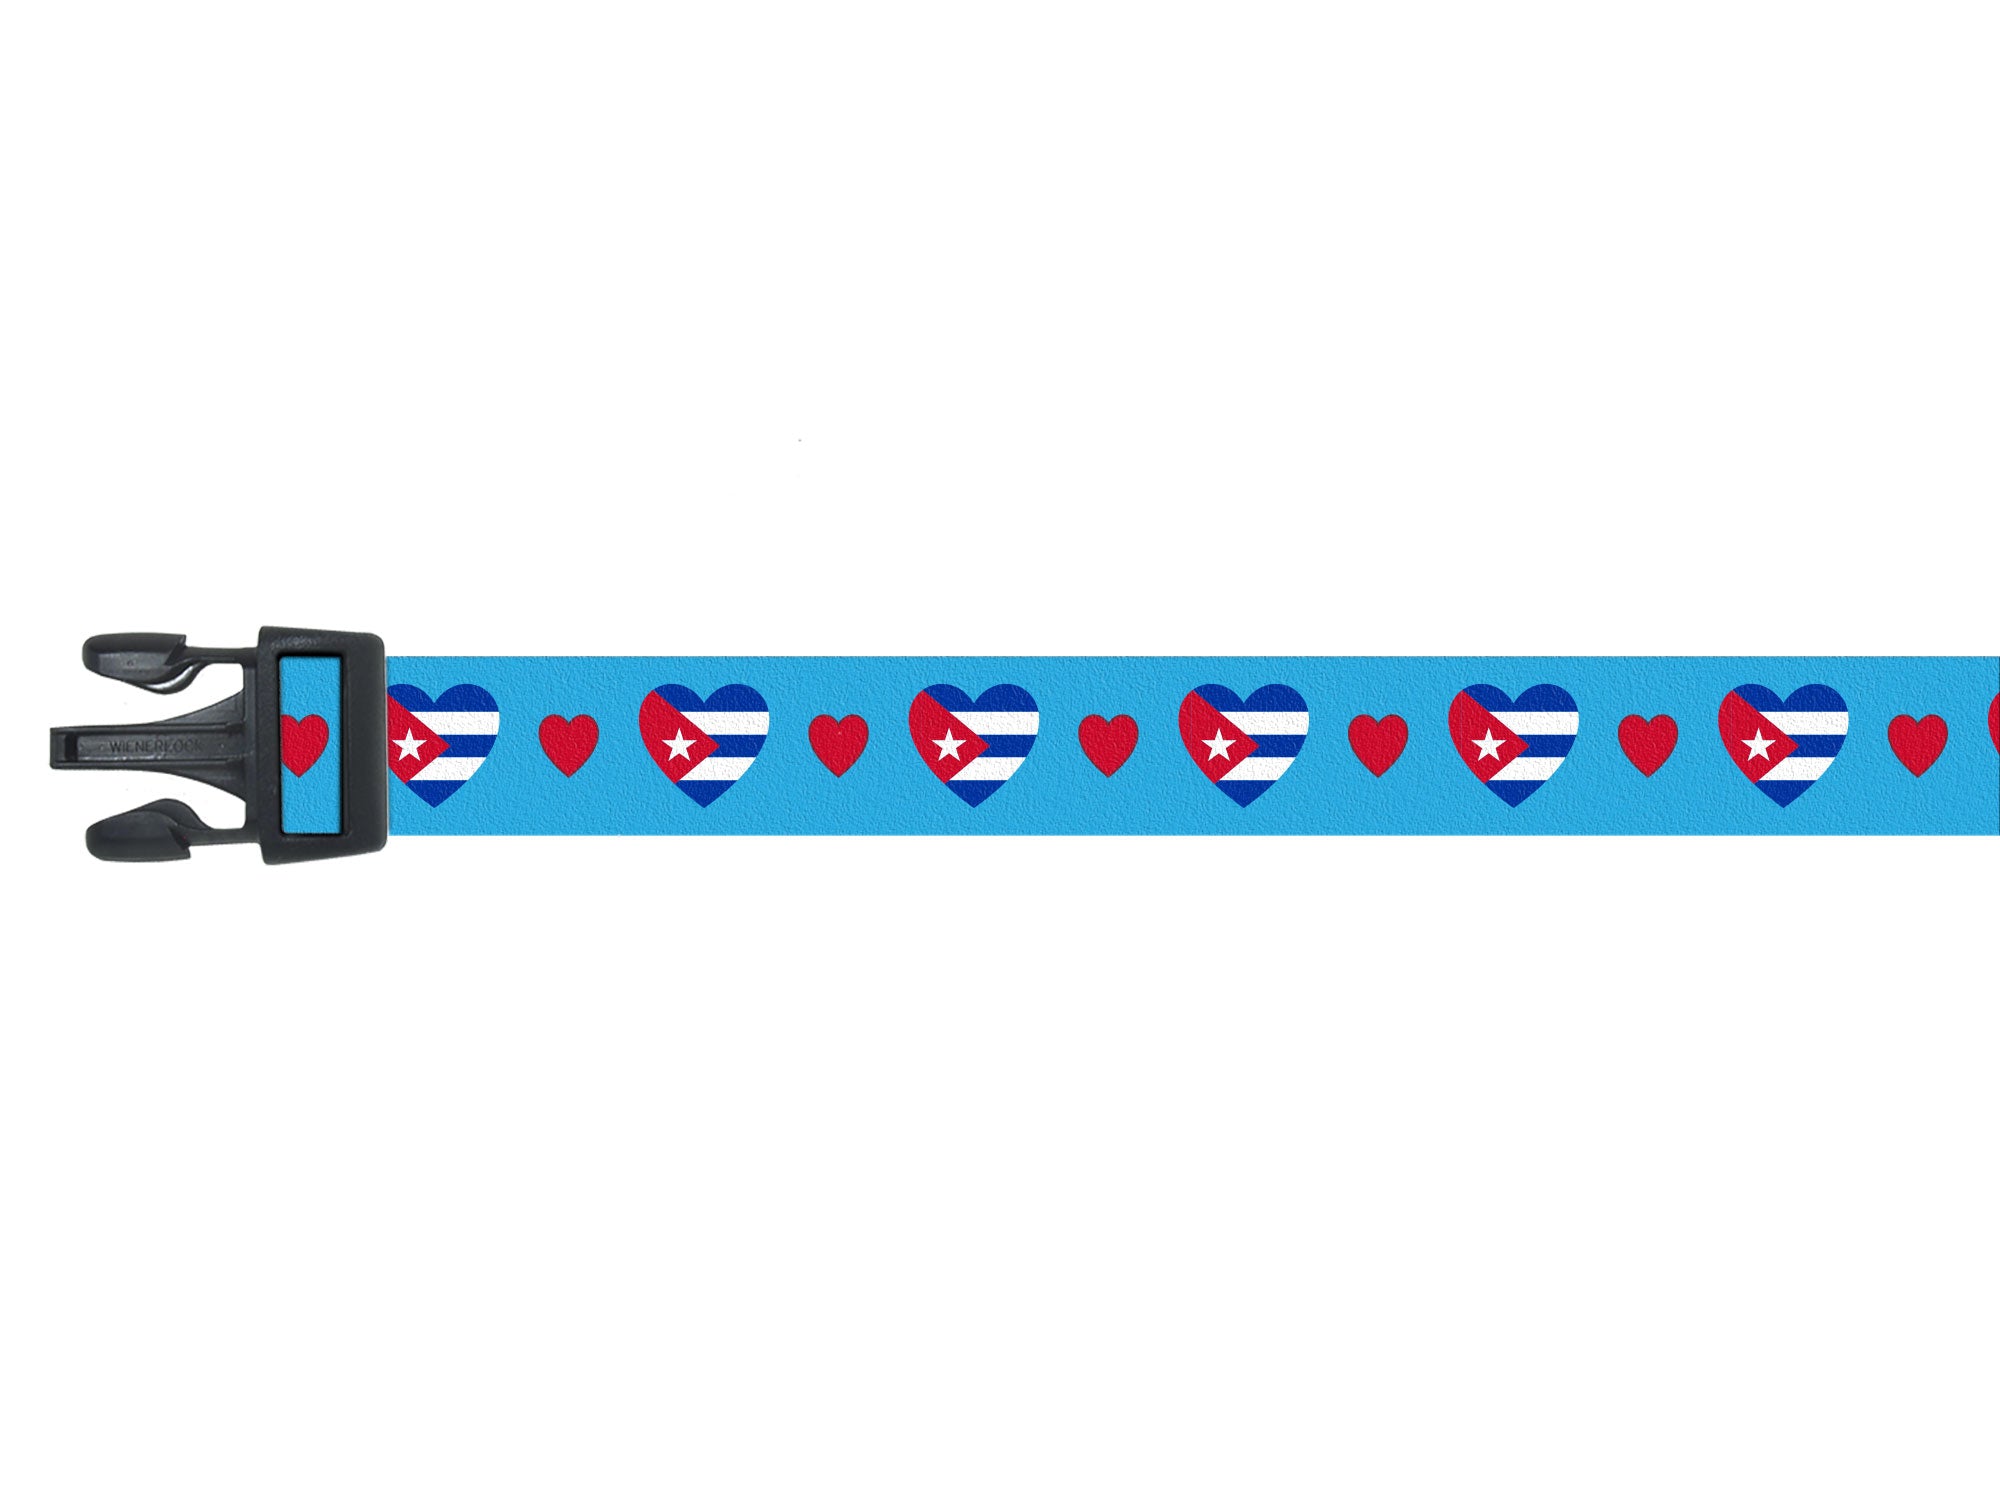 Dog Collar with Cuba Hearts Pattern in blue